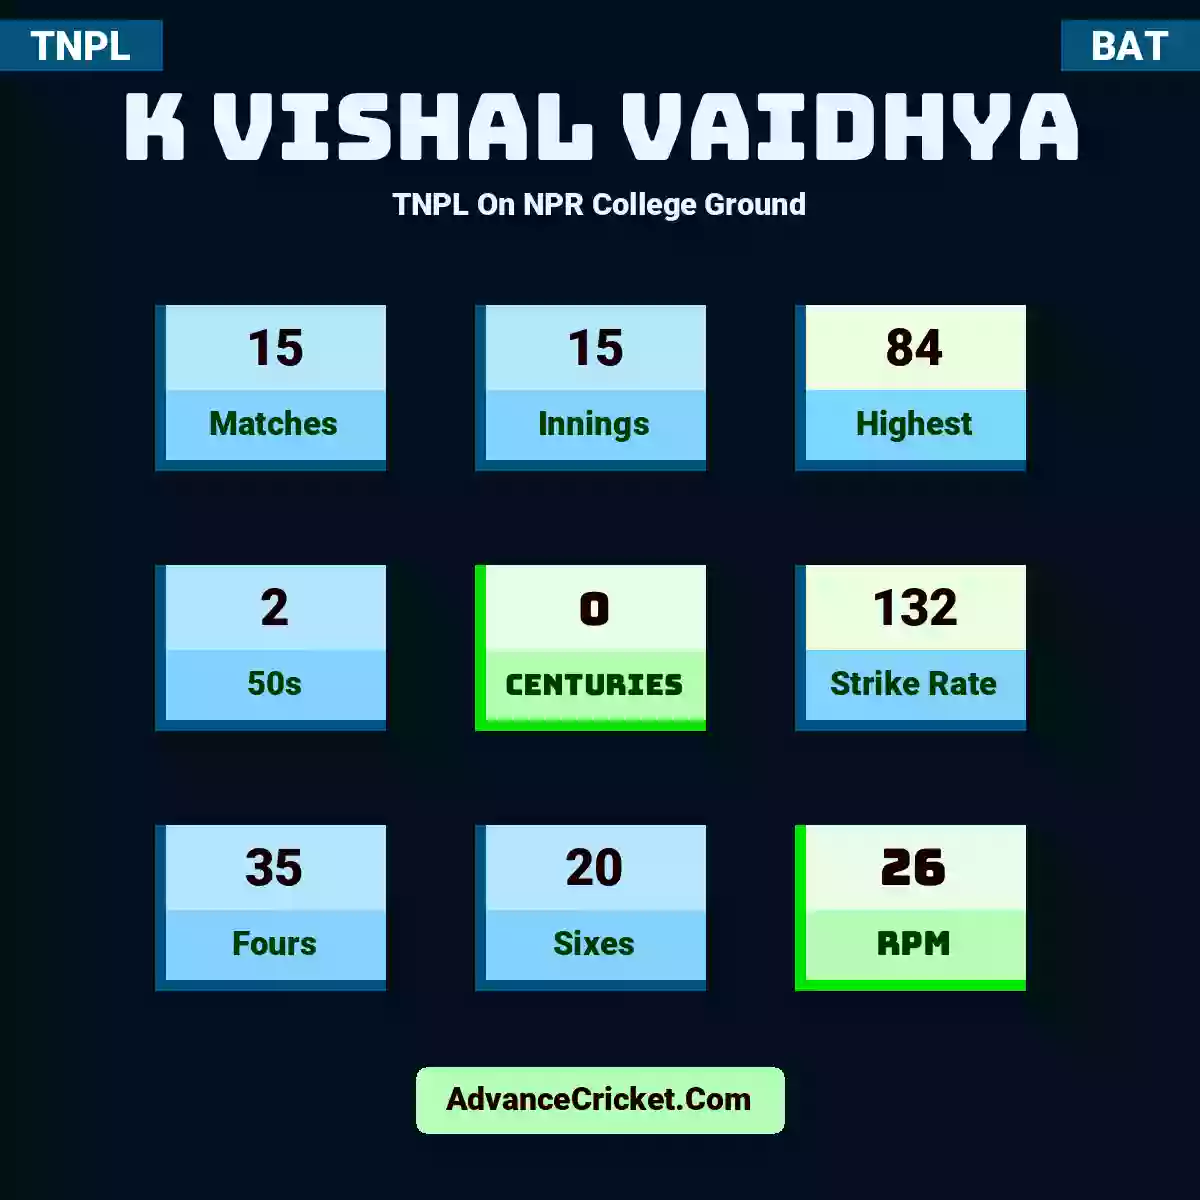 K Vishal Vaidhya TNPL  On NPR College Ground, K Vishal Vaidhya played 15 matches, scored 84 runs as highest, 2 half-centuries, and 0 centuries, with a strike rate of 132. K.Vaidhya hit 35 fours and 20 sixes, with an RPM of 26.